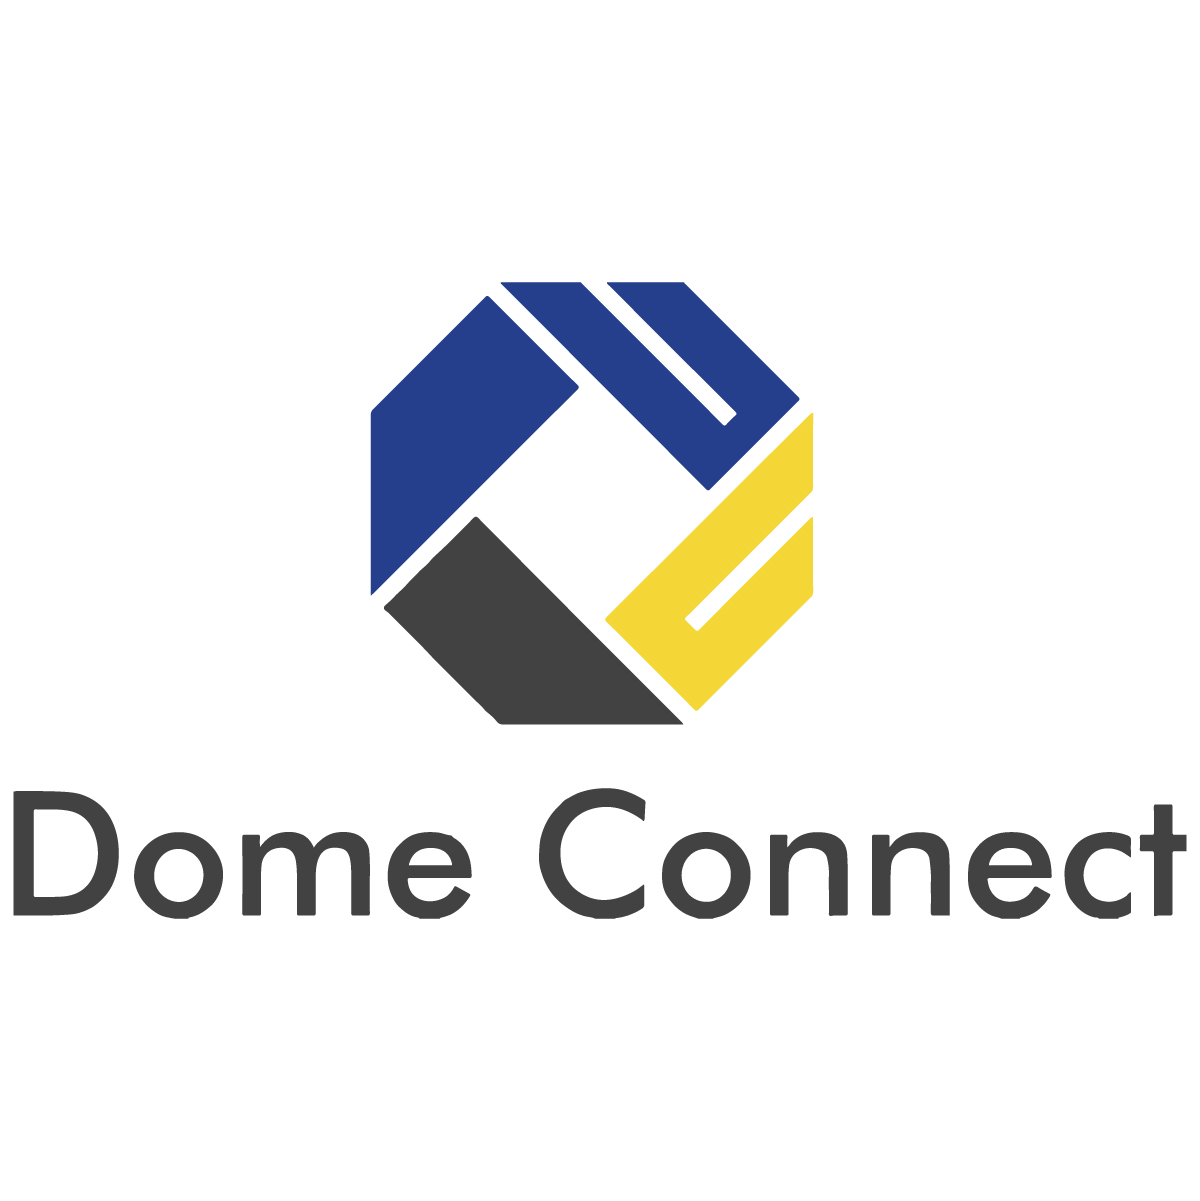 Dome Connect